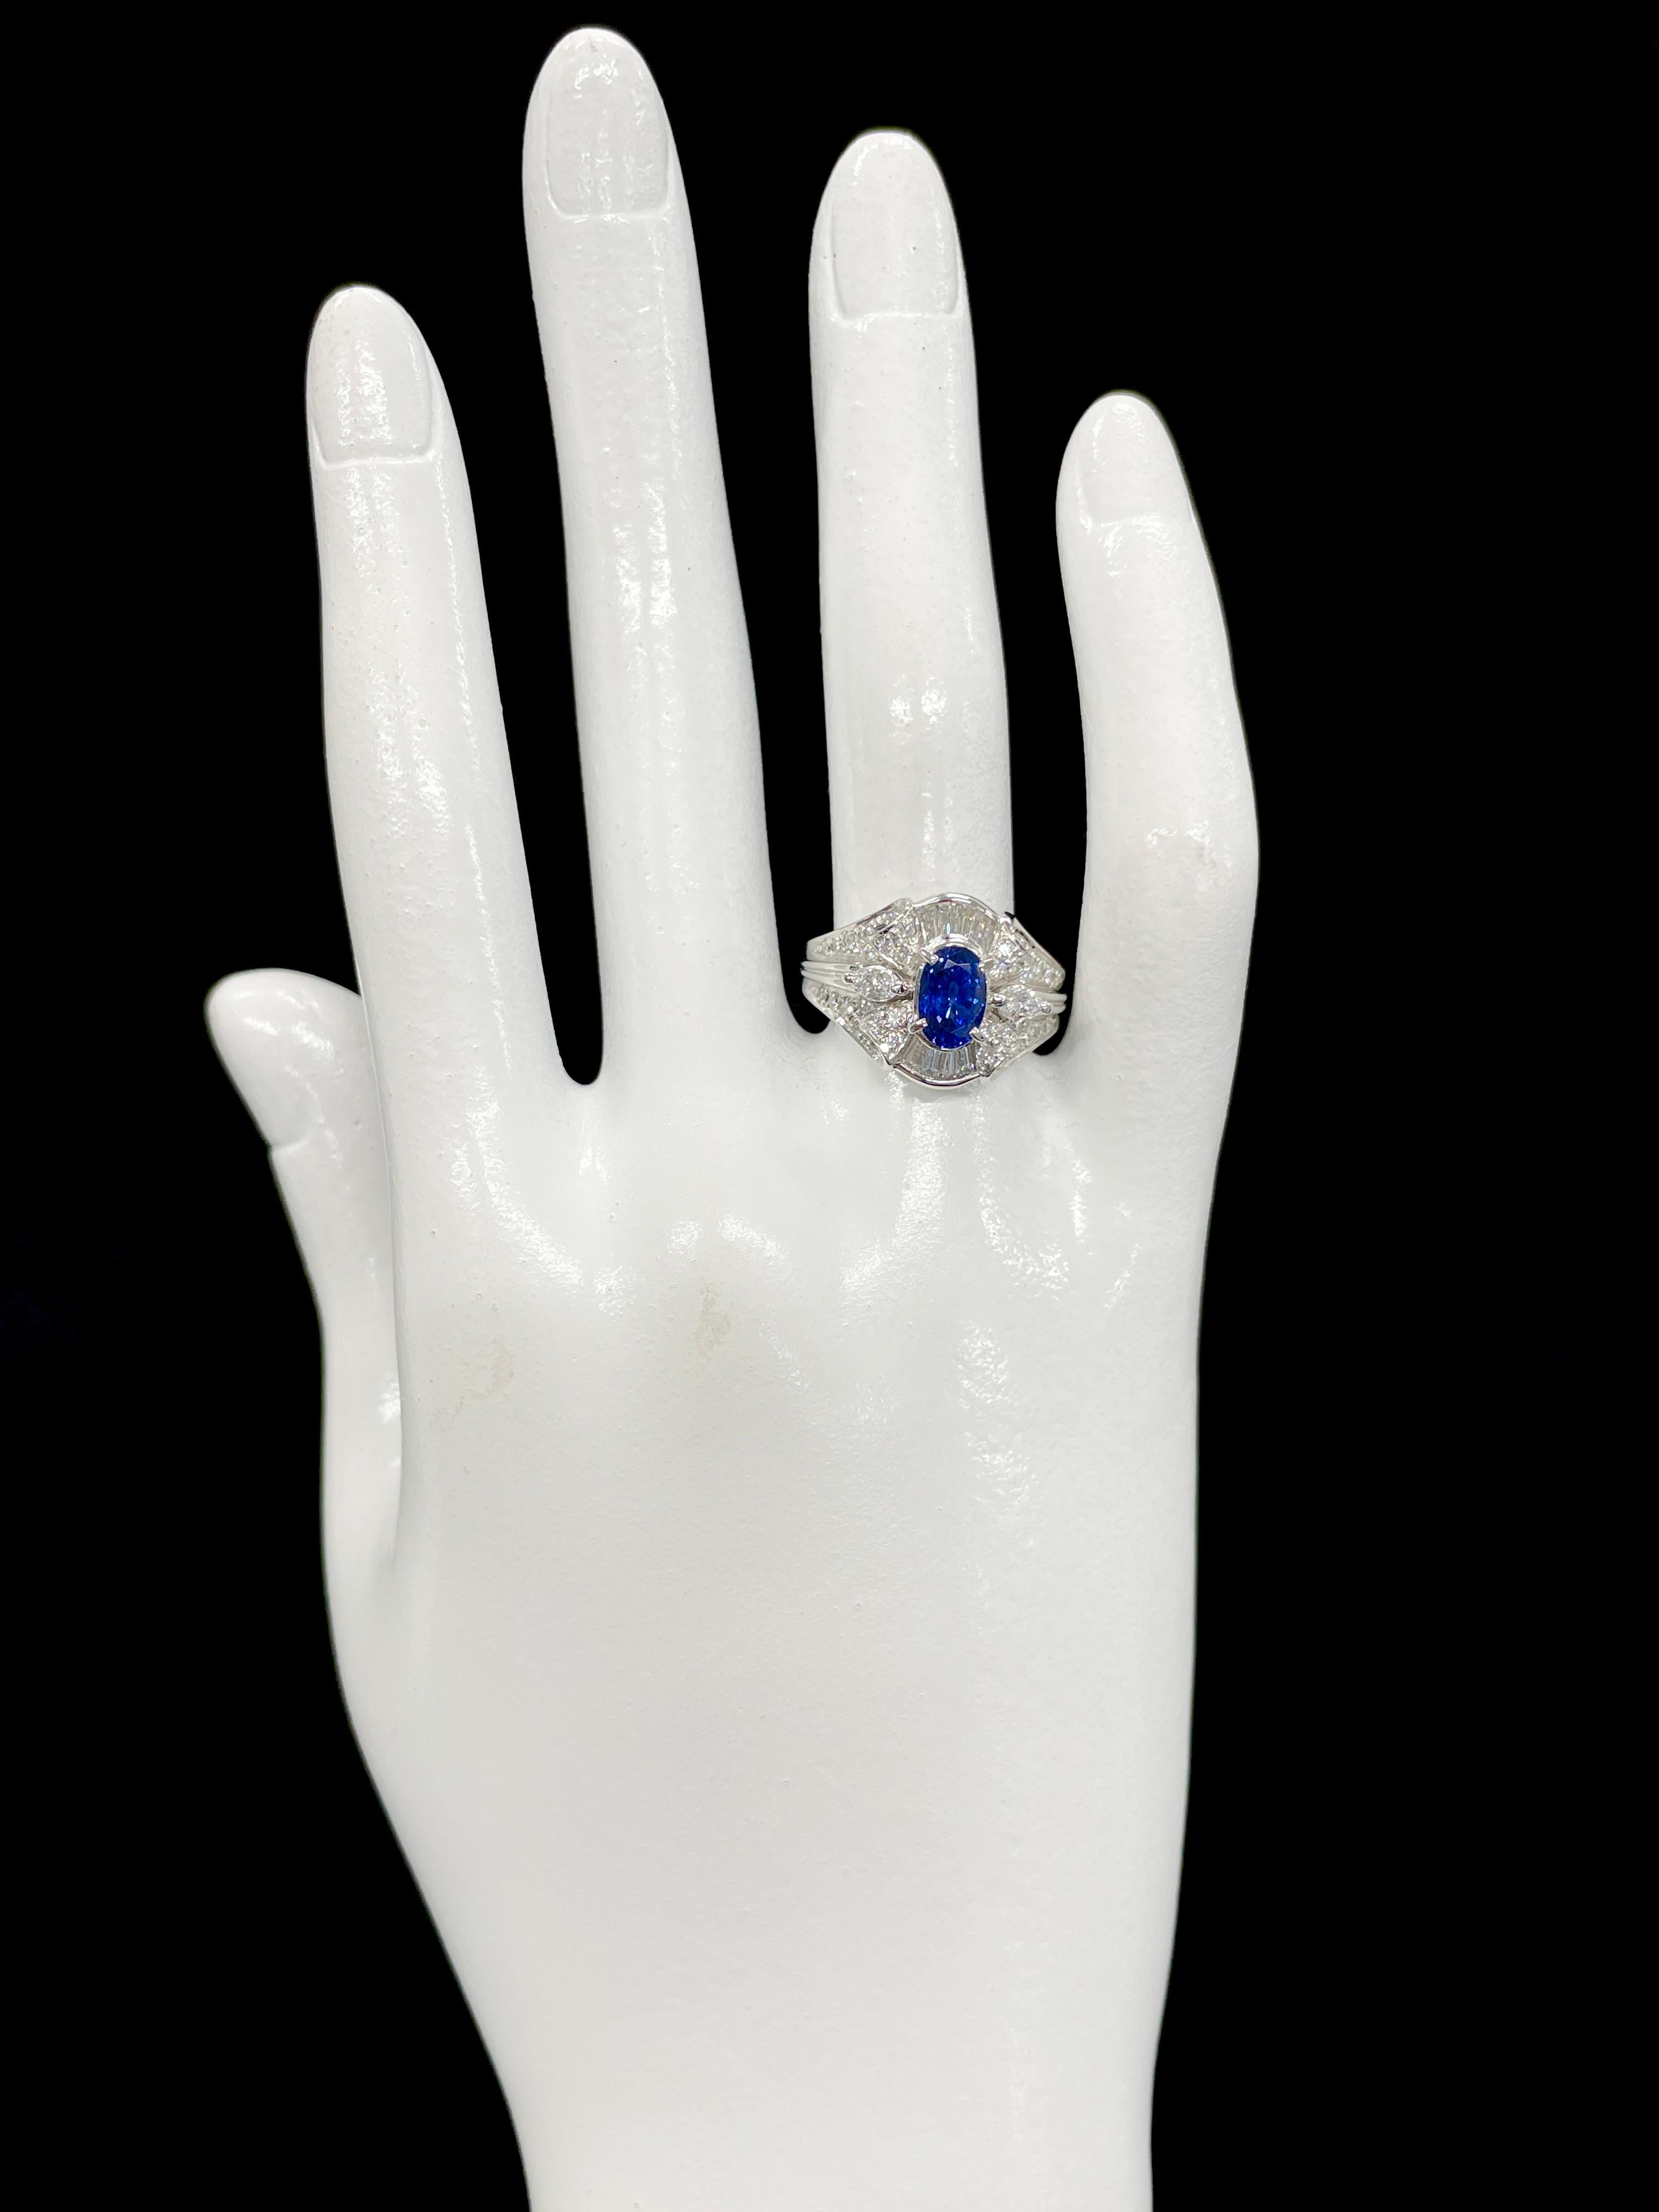 Vintage 1.46 Carat Natural Blue Sapphire and Diamond Ring Made in Platinum For Sale 1